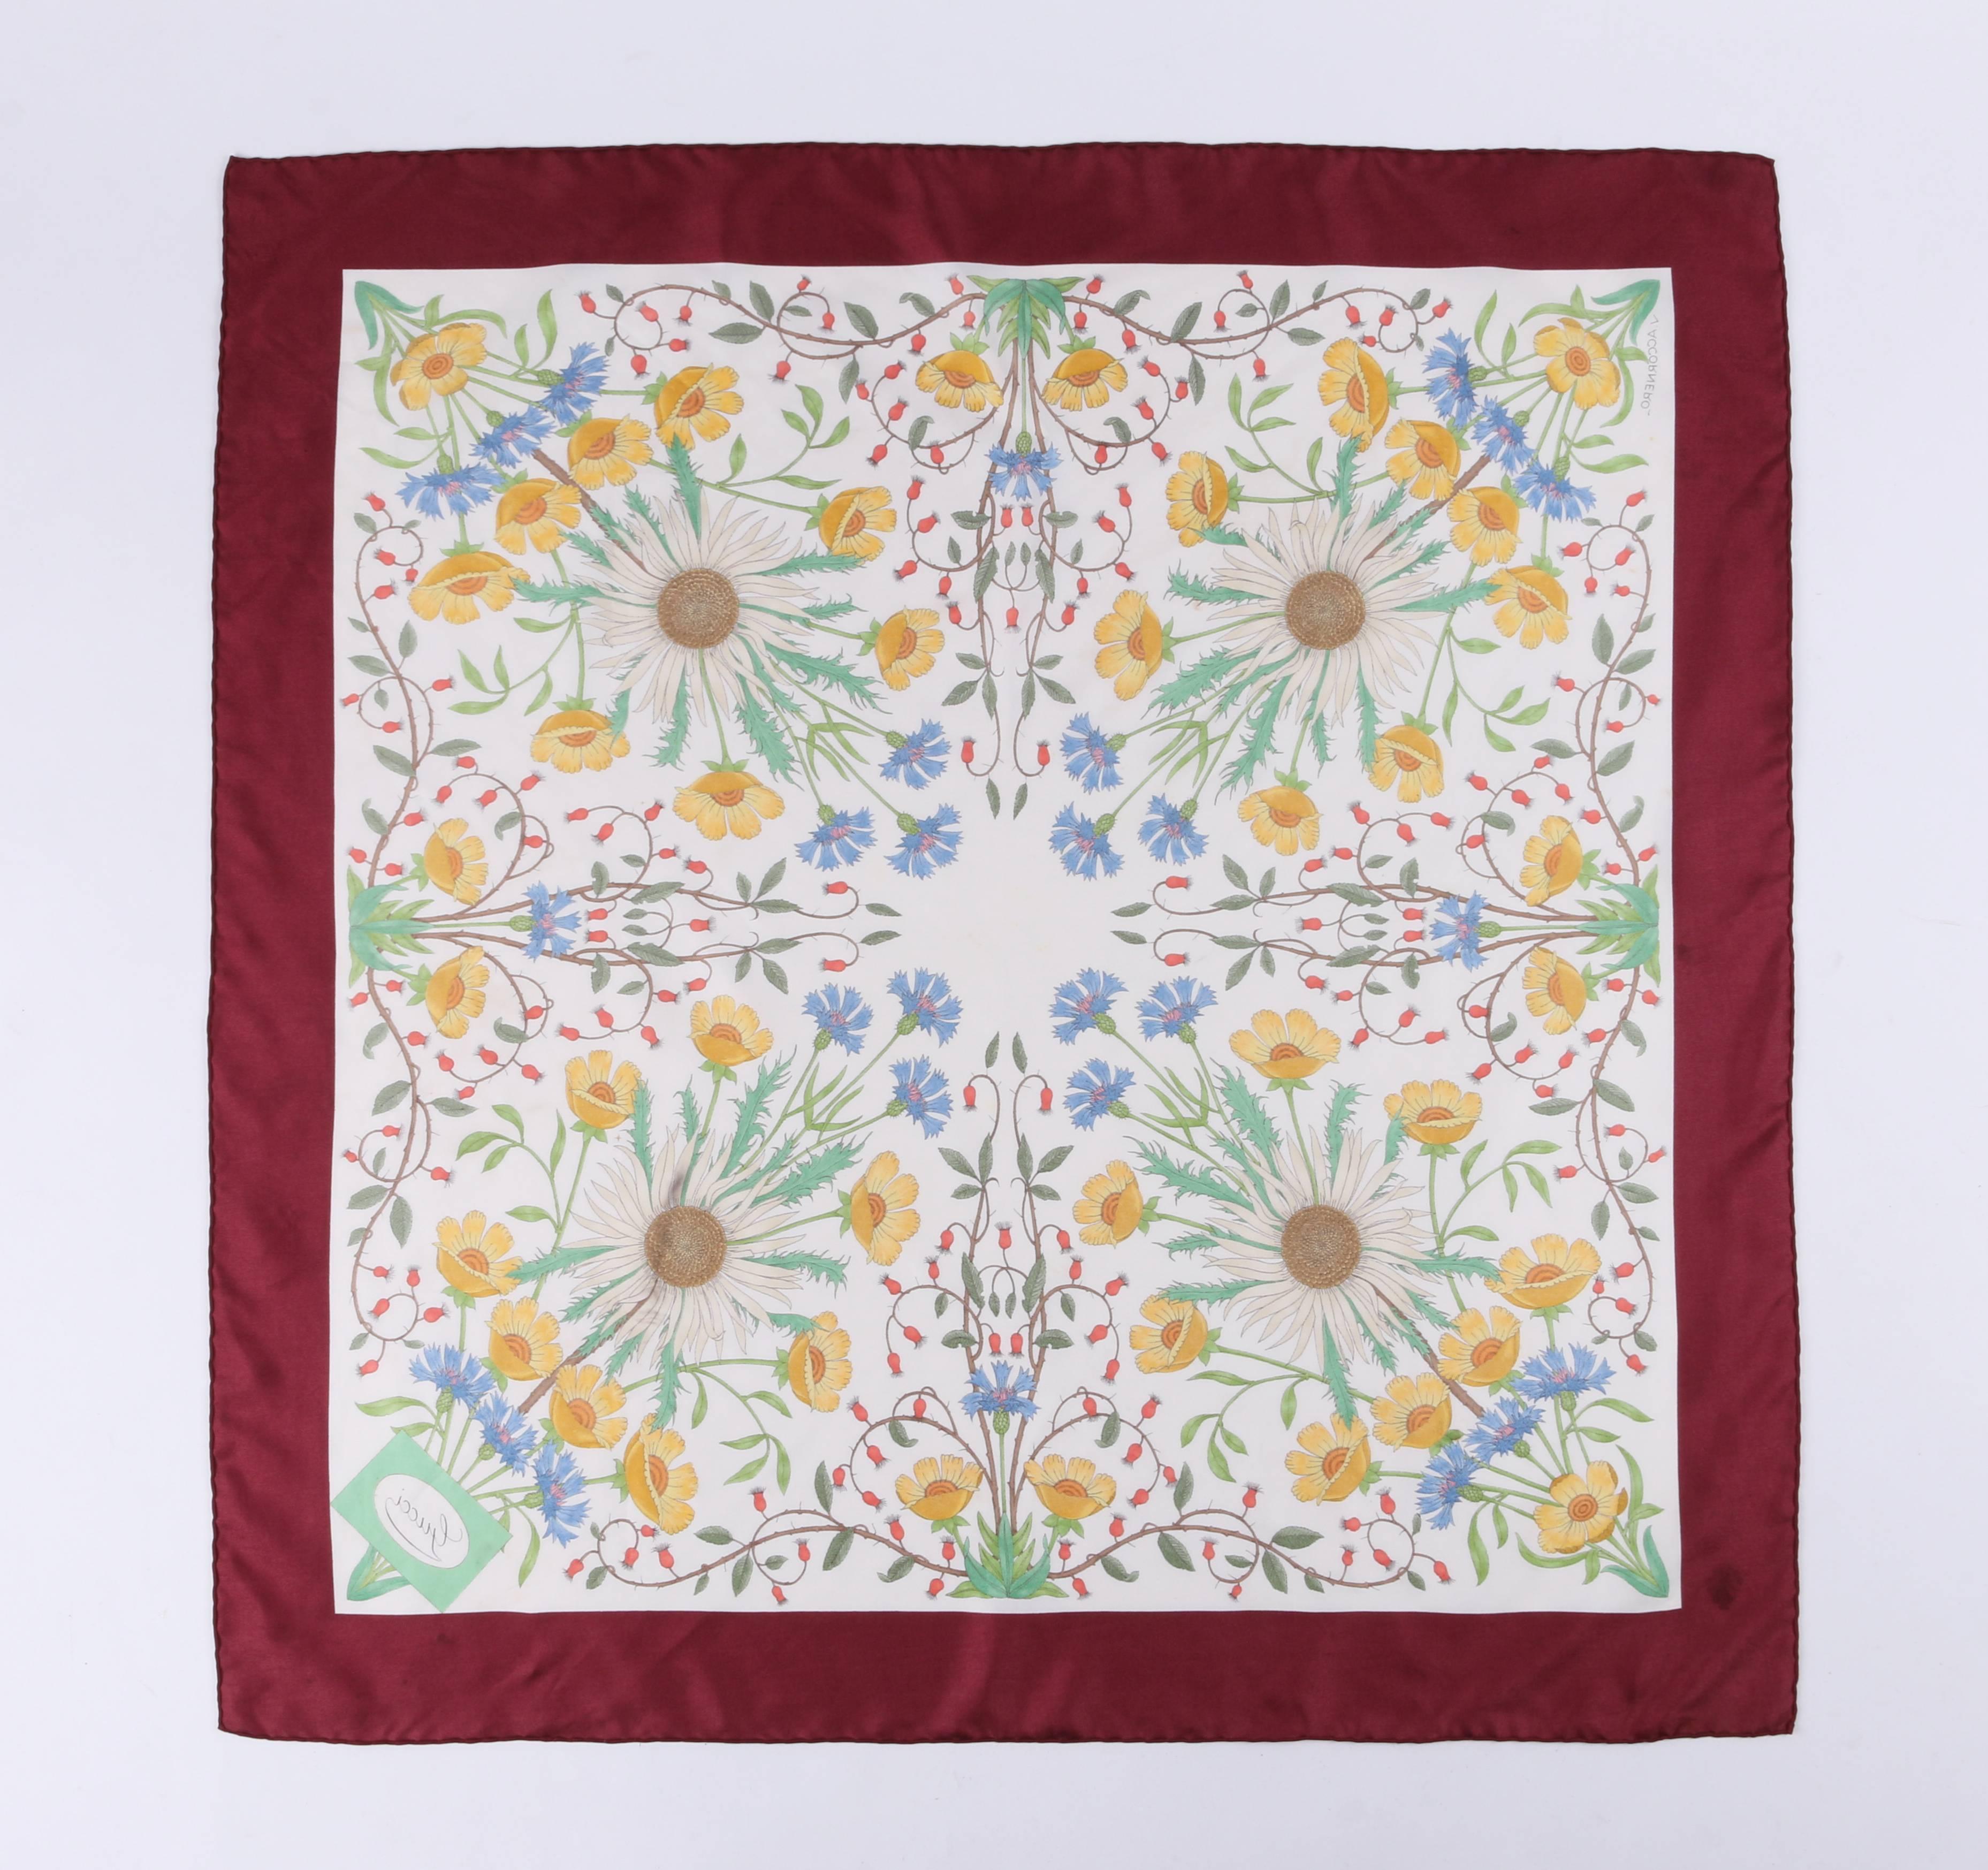 Gucci c.1970's multicolored floral print silk scarf designed by Viittorio Accornero. Wide burgundy border with ivory background and multicolored symmetrical floral print. Hand-rolled edges. 